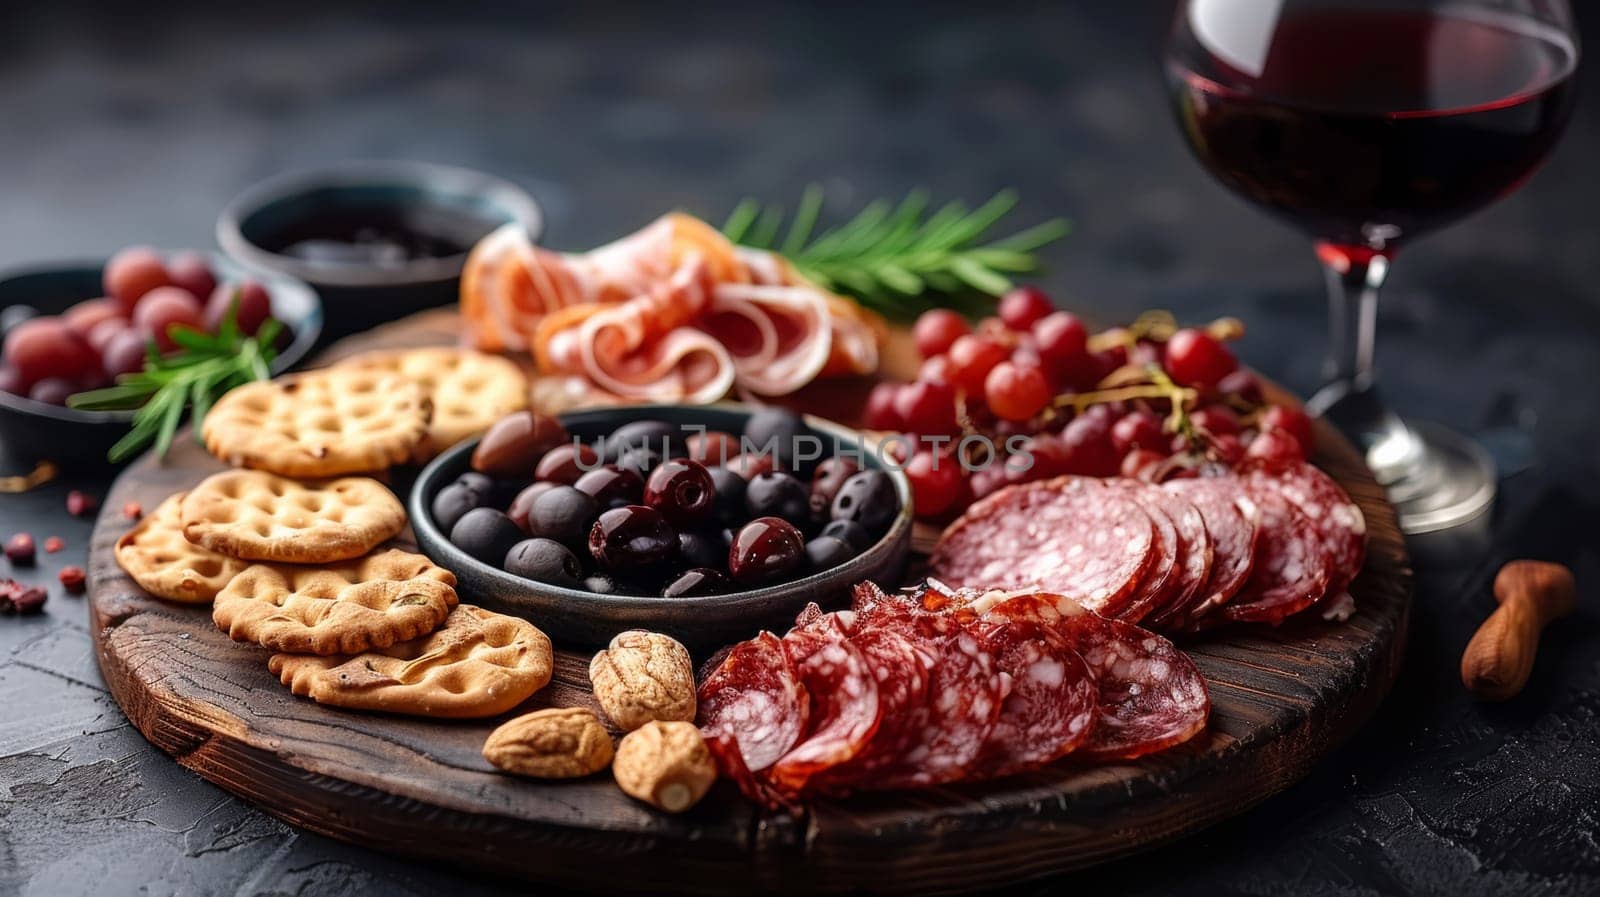 A plate of food with crackers, olives and grapes, AI by starush